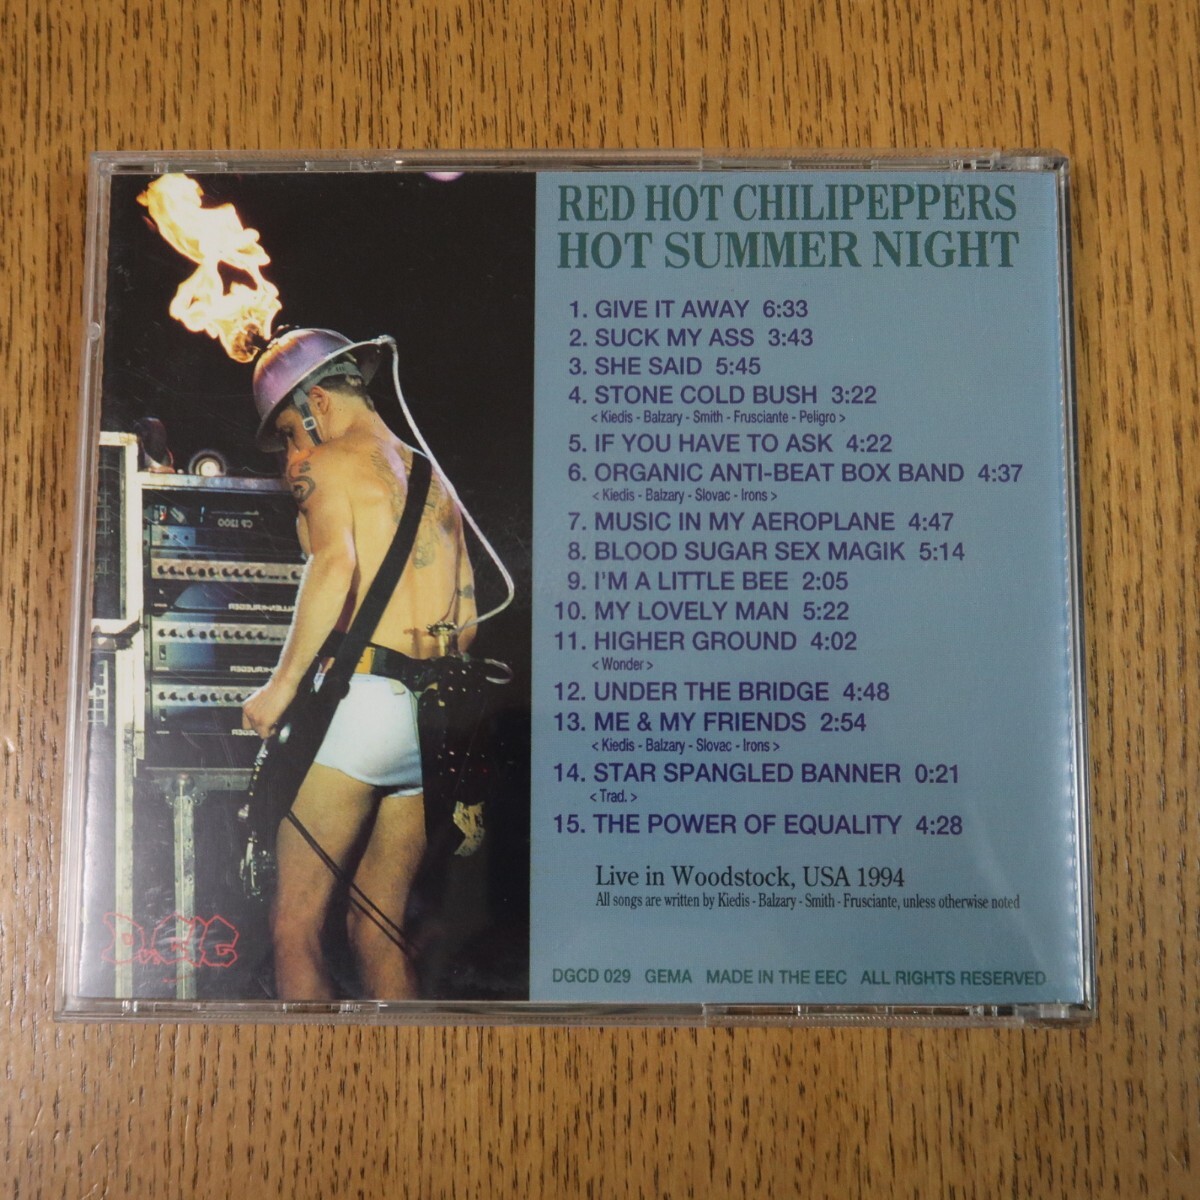 Red Hot Chilipepprs HOT SUMMER NIGHT 輸入盤 Live in Woodstock 1994 送料無料　レッド・ホット・チリ・ペッパーズ_画像2